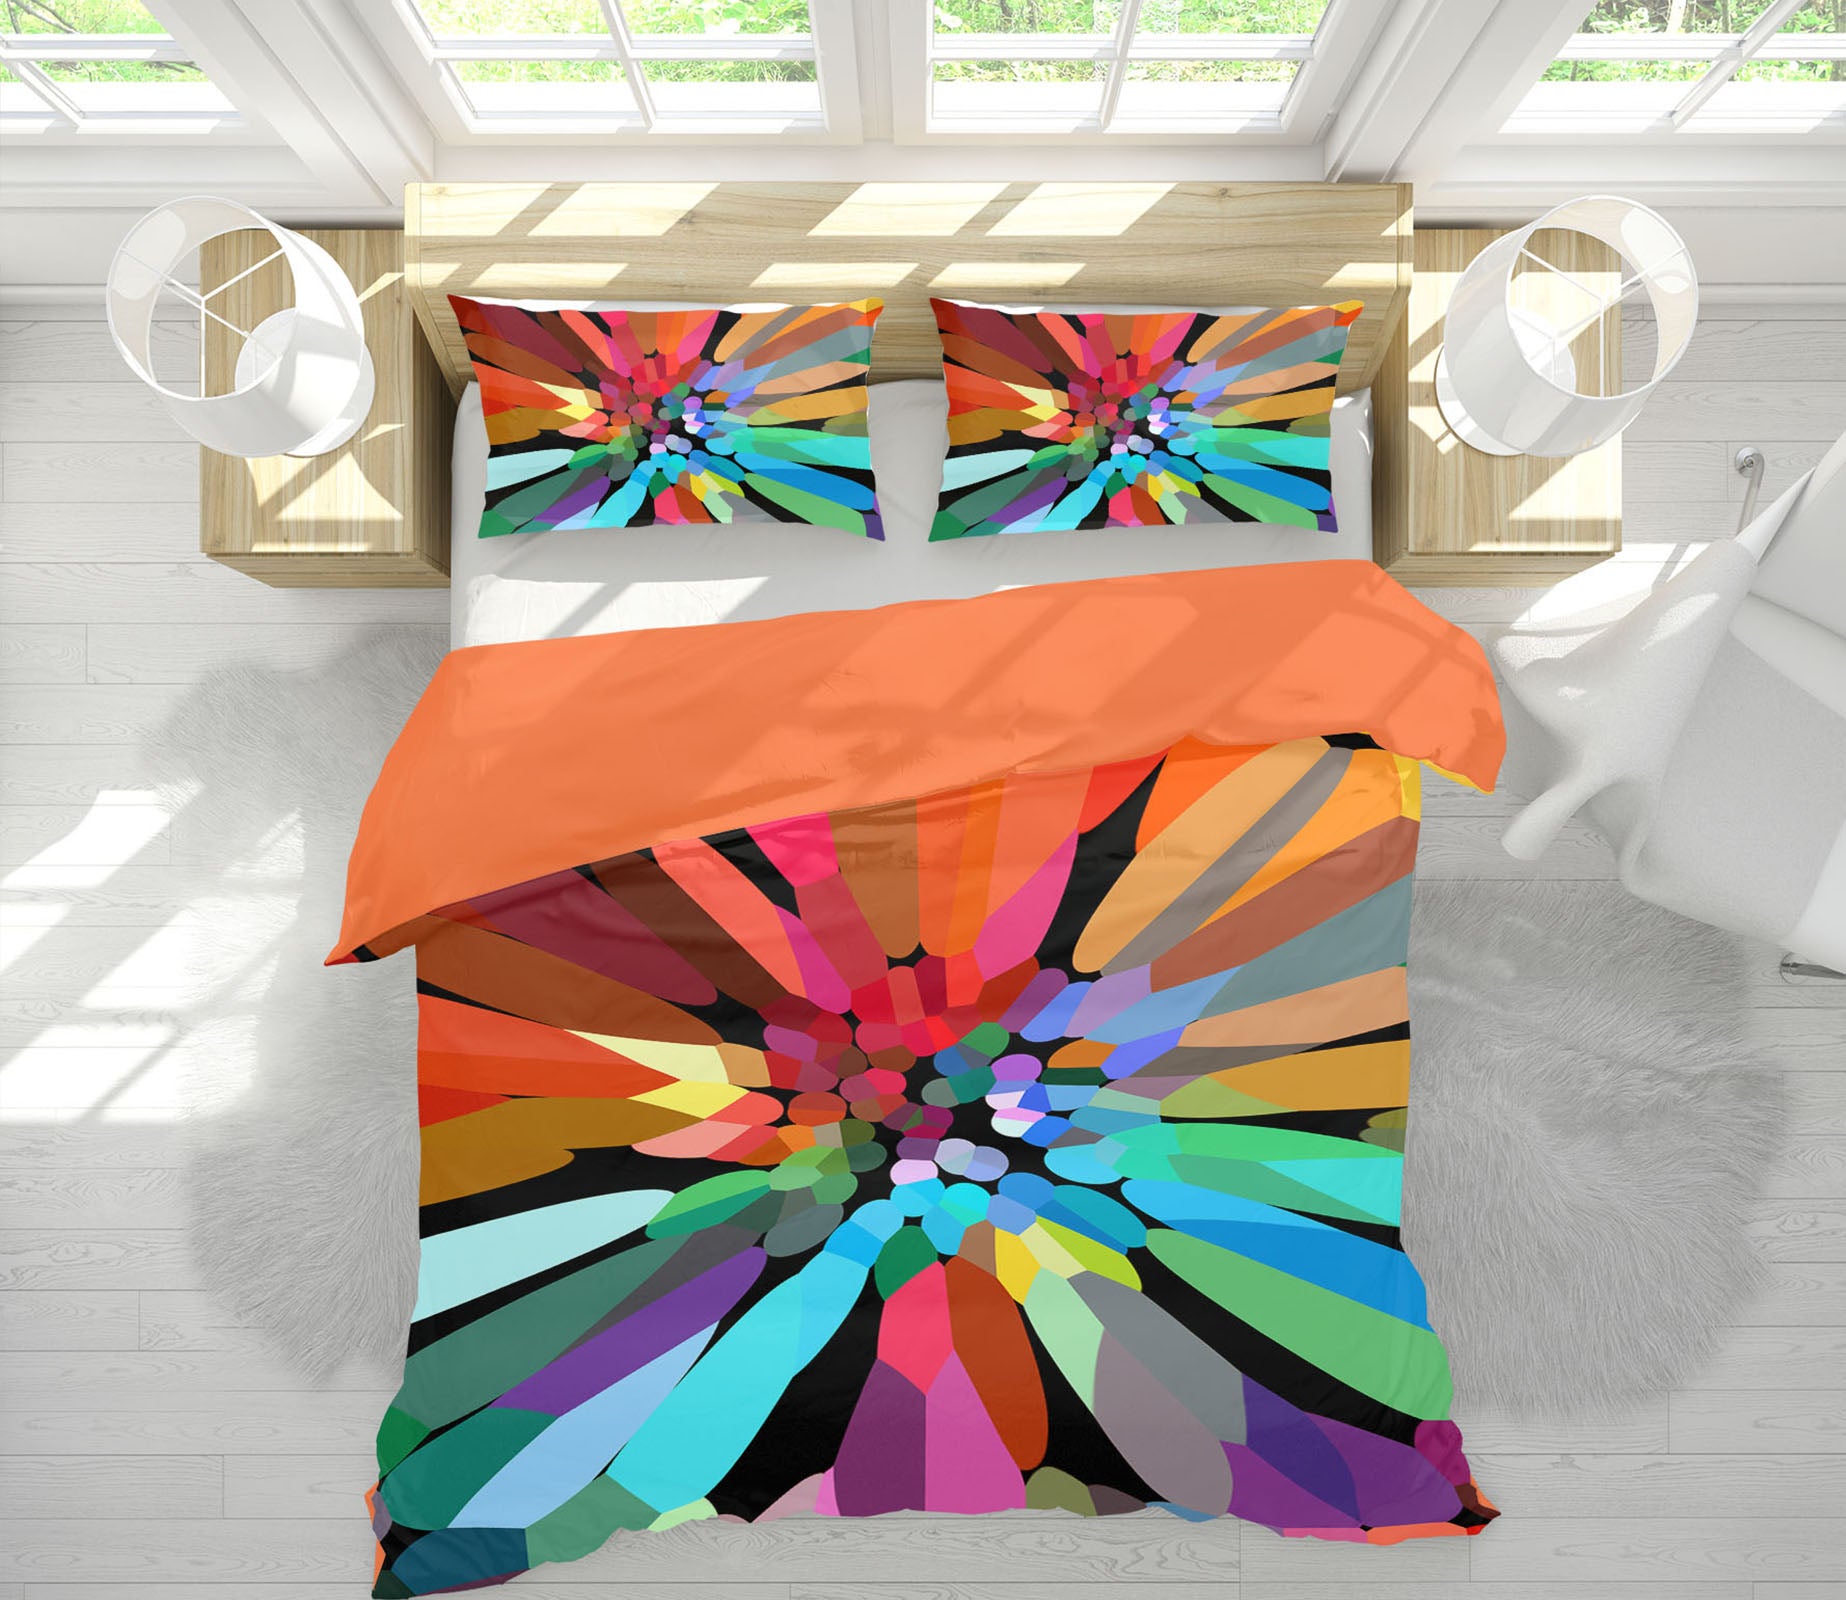 3D Colored Petals 2001 Shandra Smith Bedding Bed Pillowcases Quilt